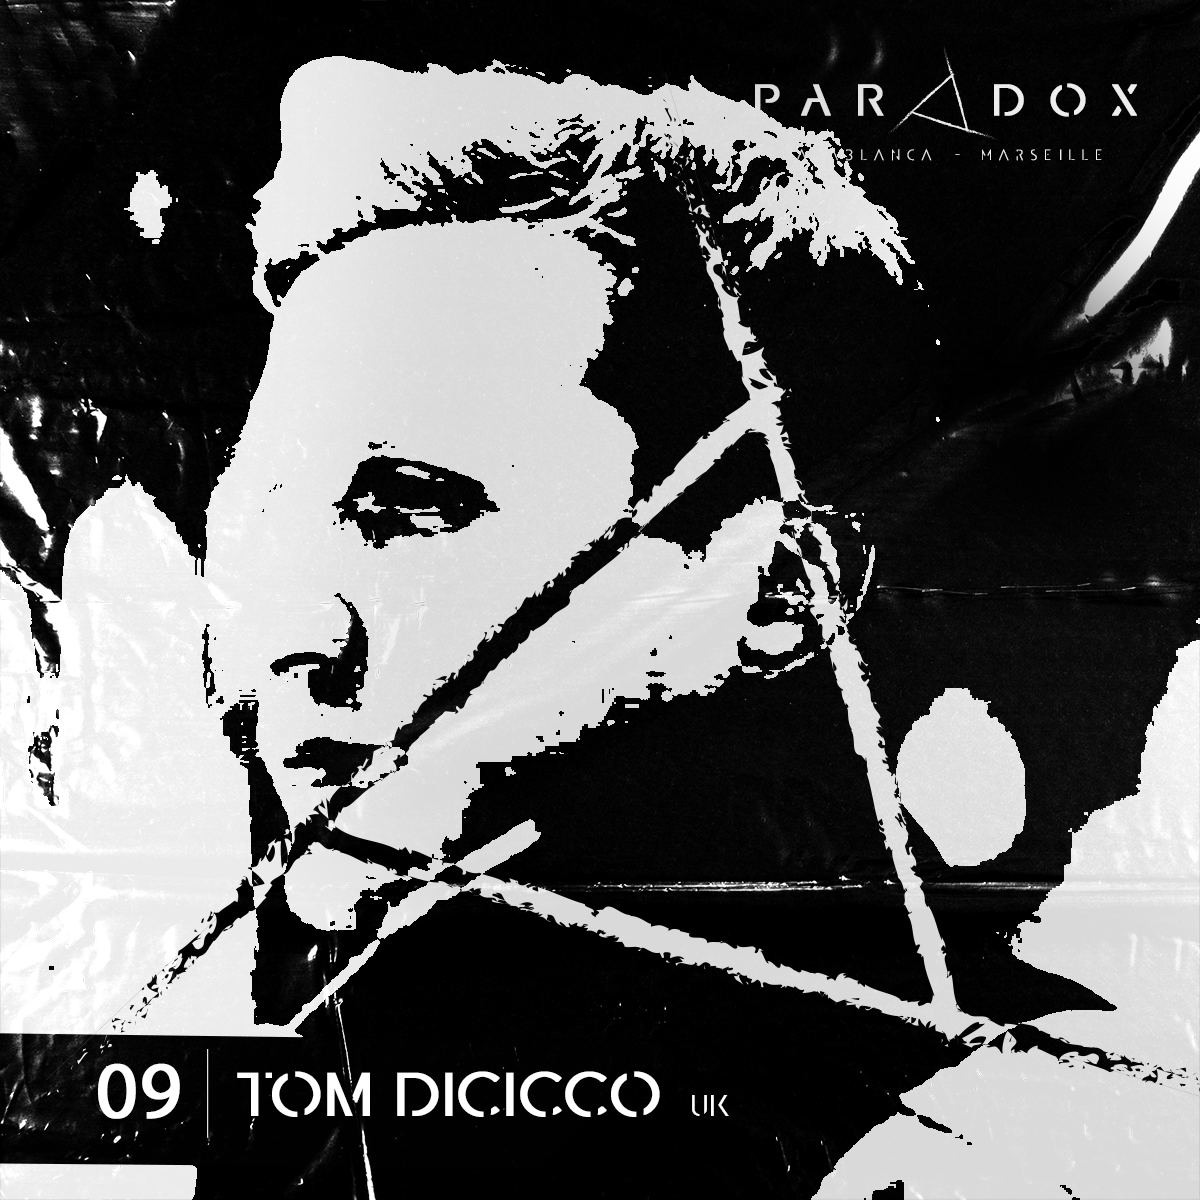 black and white paradox techno podcast cover number 09 with TOM DICICCO